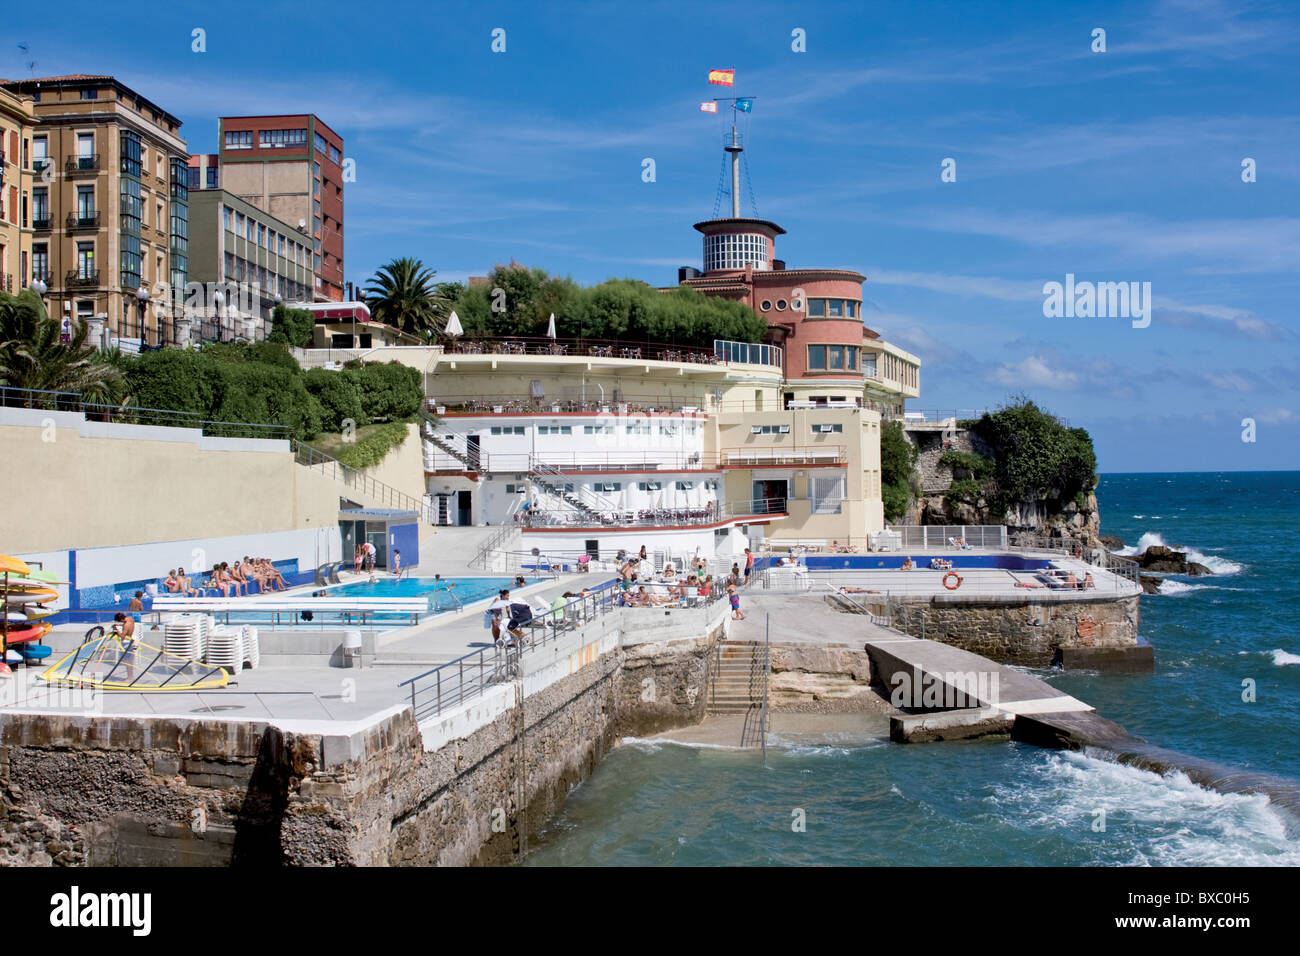 Gijón, Asturias, Spain. Real Club Astur de Regatas, nautical club was founded on September 11, 1911, one of the oldest institutions in Gijón Stock Photo